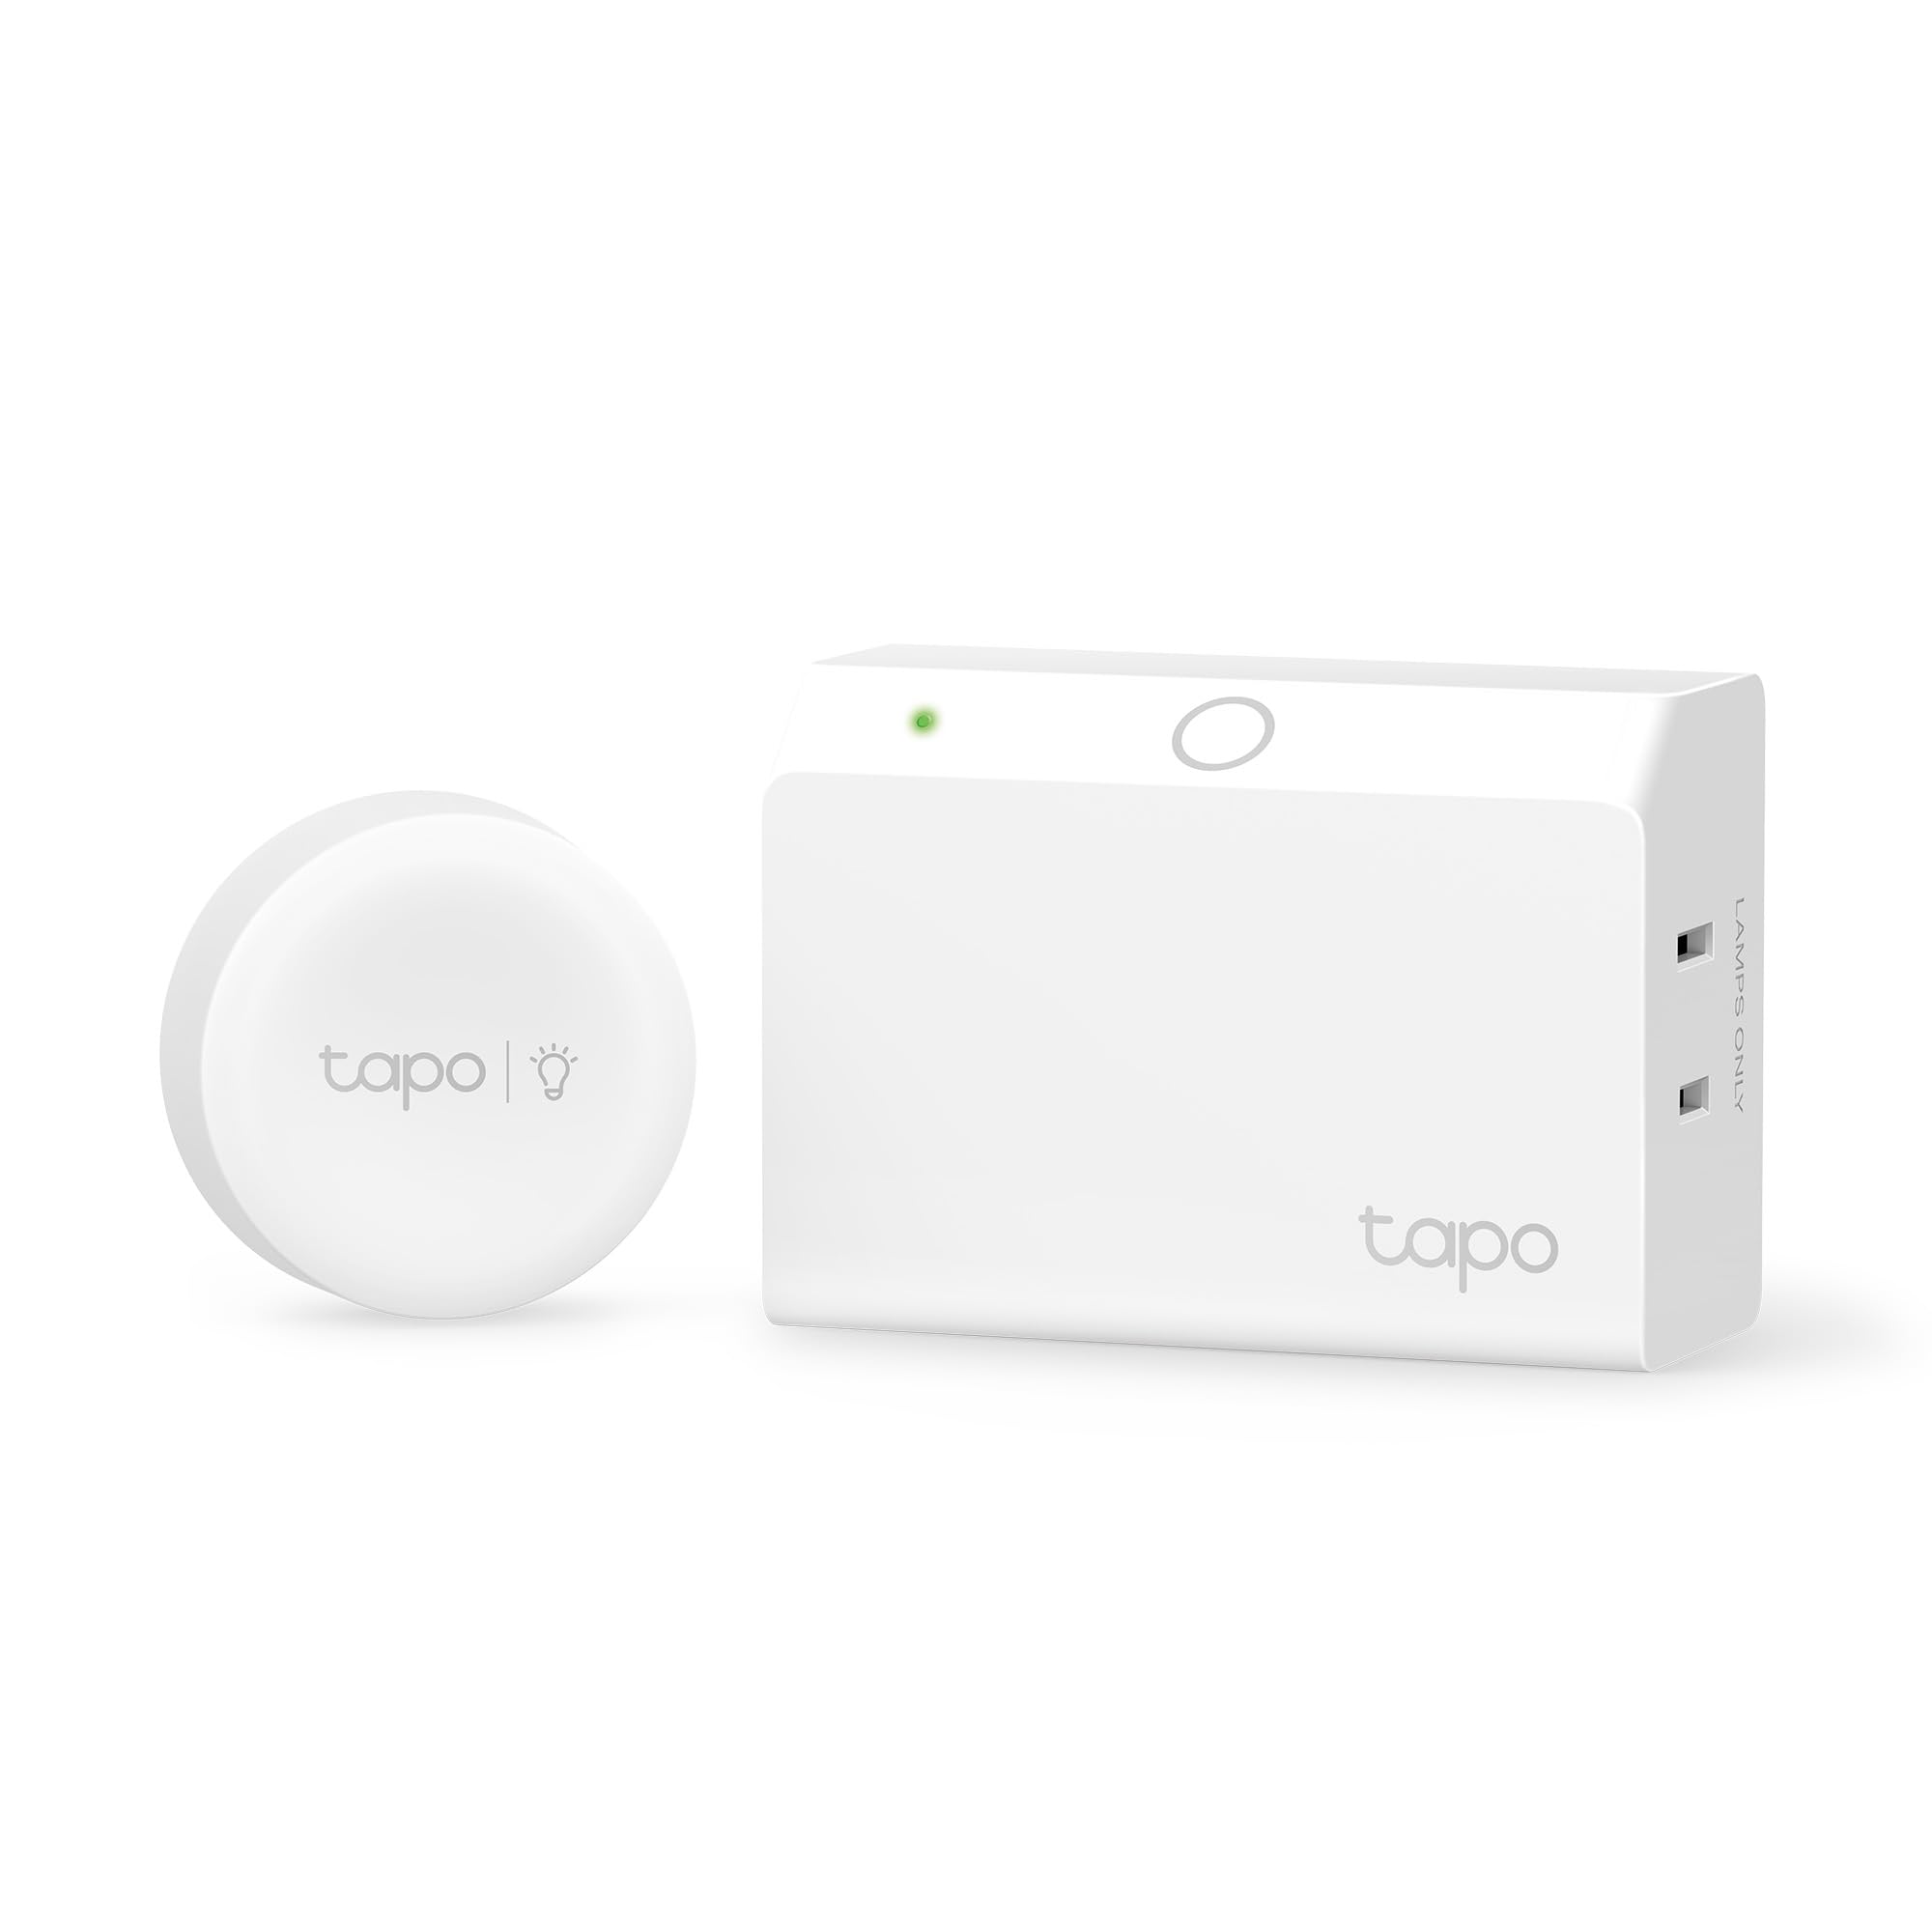 TP-Link Tapo Smart Dimmer Plug KIT, Matter Compatible, Wireless Dimmer Button, Dual Outlets, Max Power 300W, Works w/Apple Home, Alexa & Google Home, ETL Certified, 2.4G Wi-Fi, White (Tapo P135 KIT)